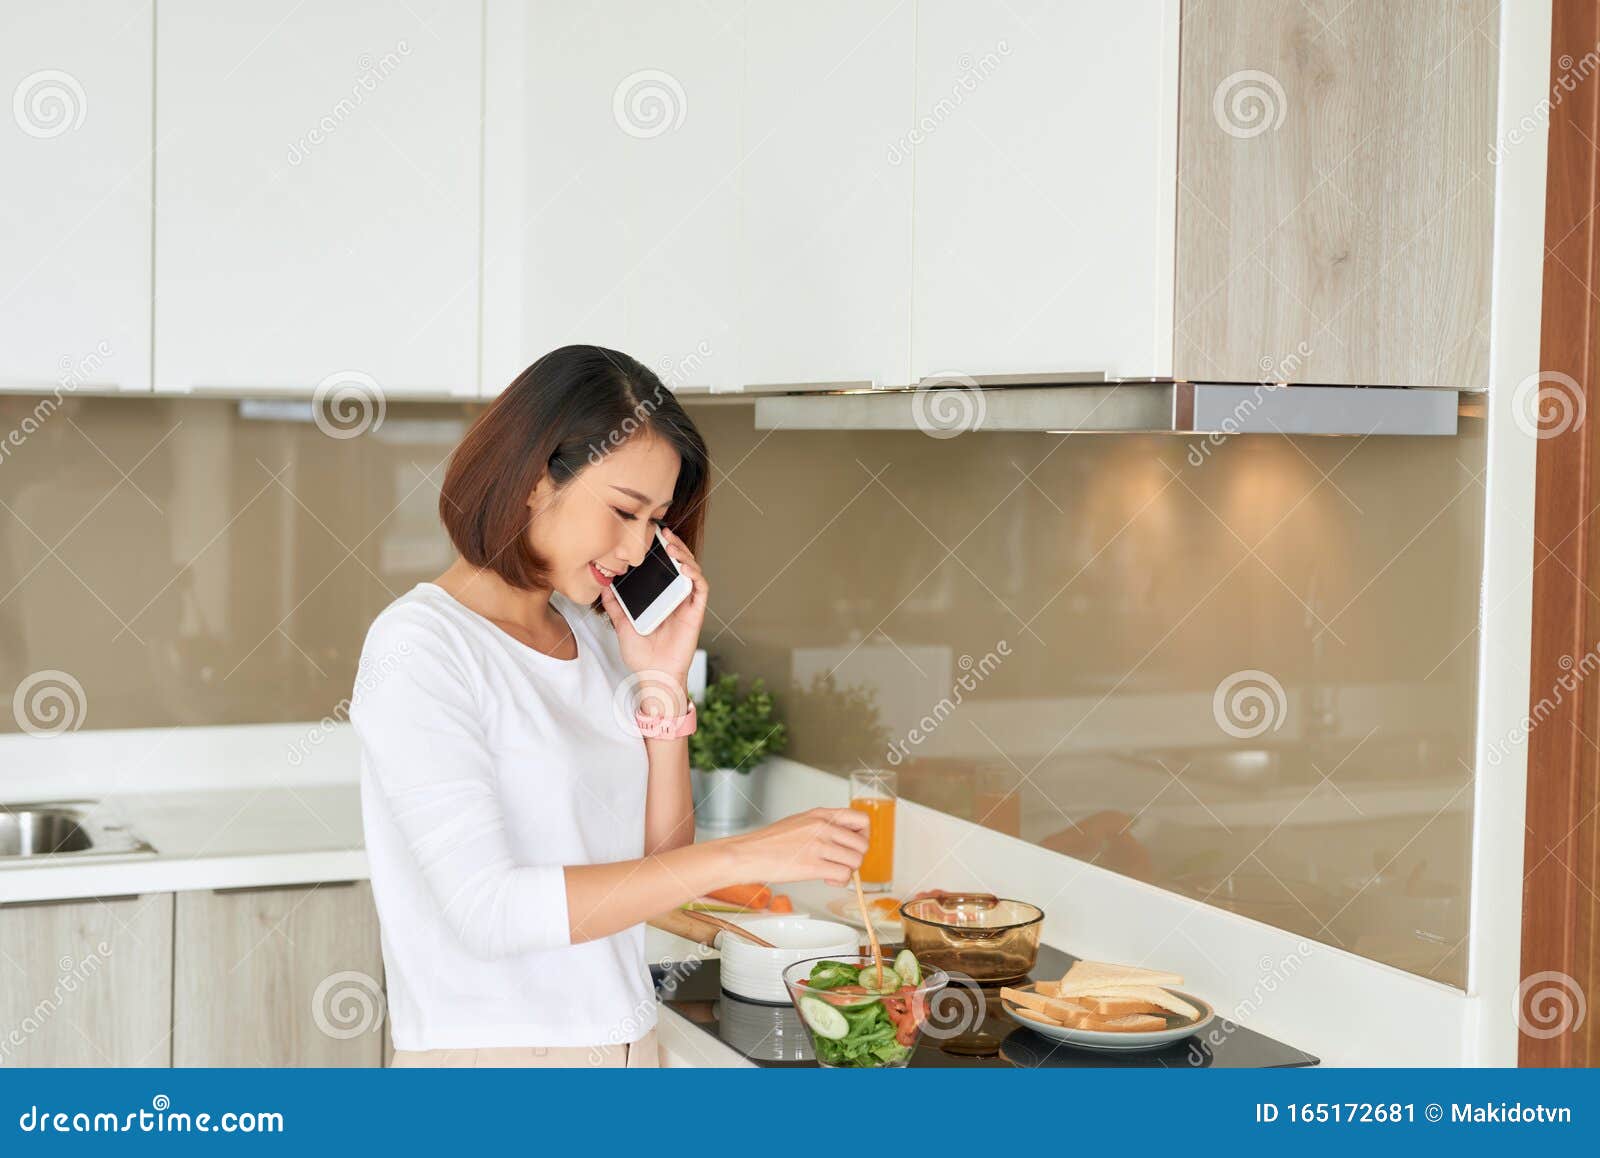 Crazy Housewife Cook In Kitchen Stock Photo - Image: 66859882